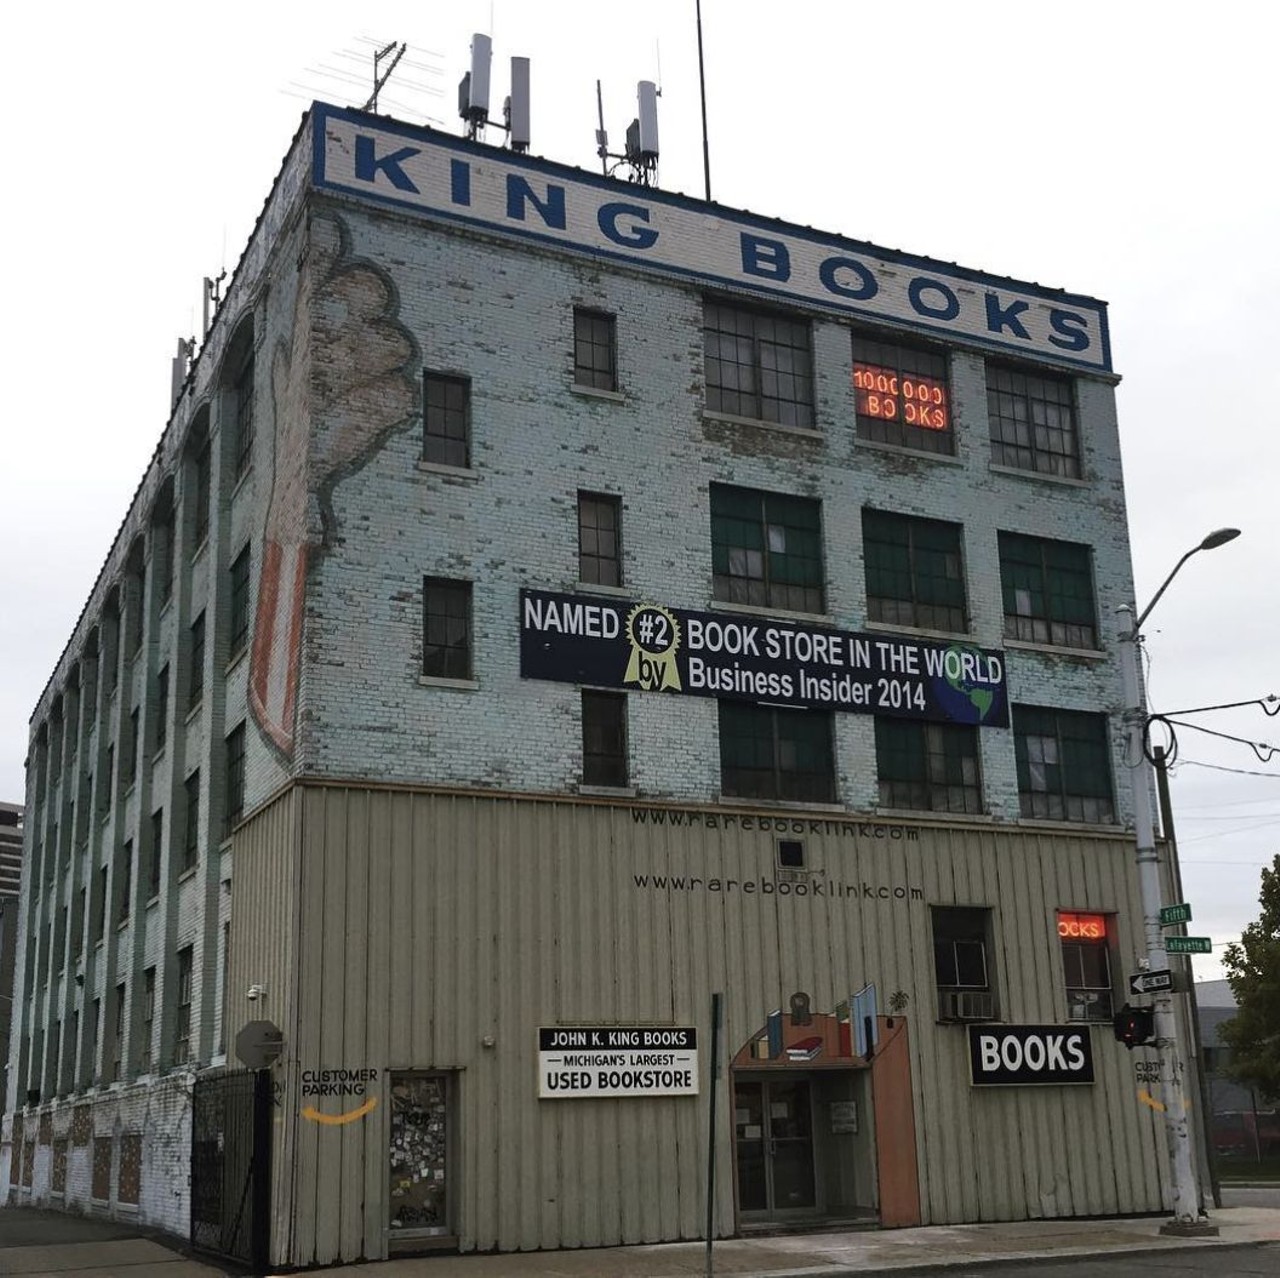 John King Books
901 W Lafayette Blvd, Detroit, MI 48226
With more than a million used books within its walls, John King Books is full of treasures waiting to be found.
Photo courtesy of @johnkingbooksdetroit